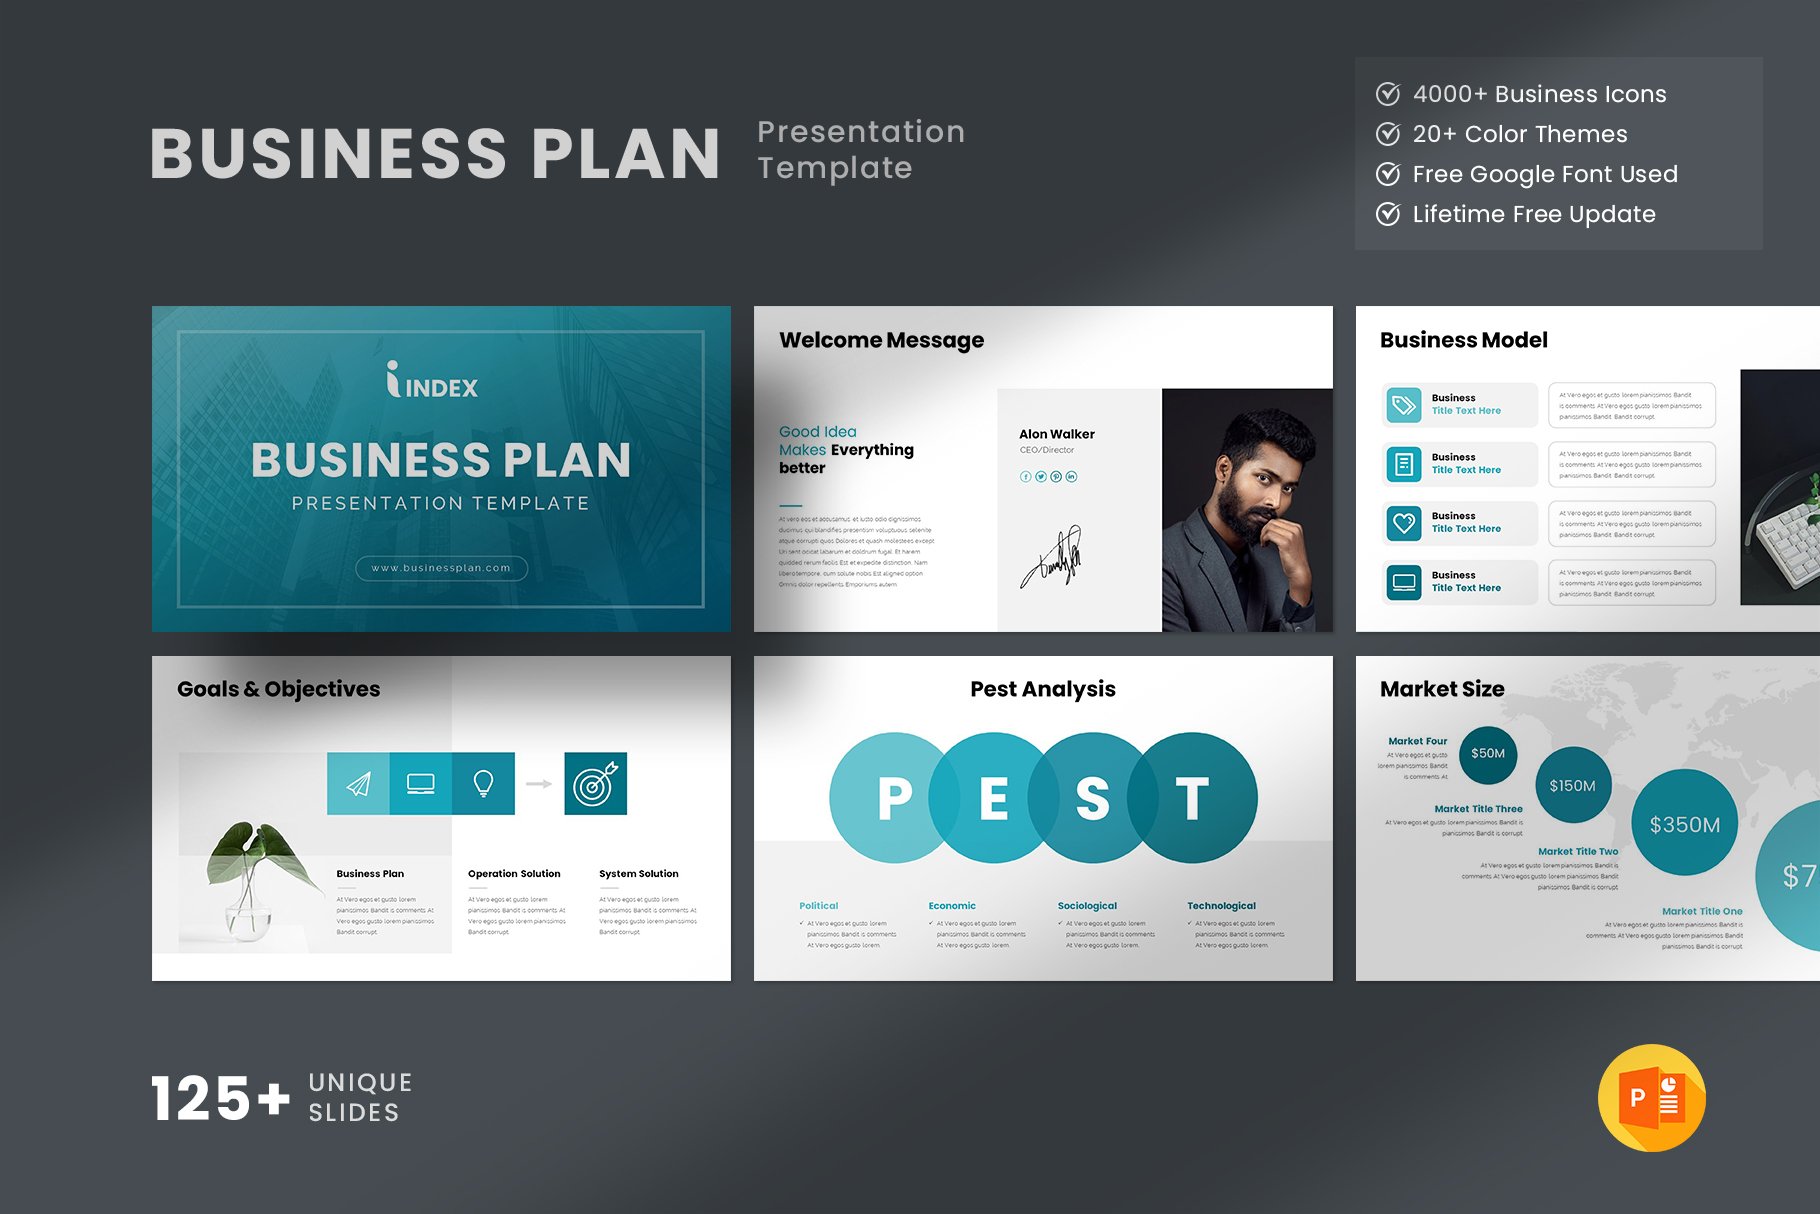 how do you create a business plan in powerpoint